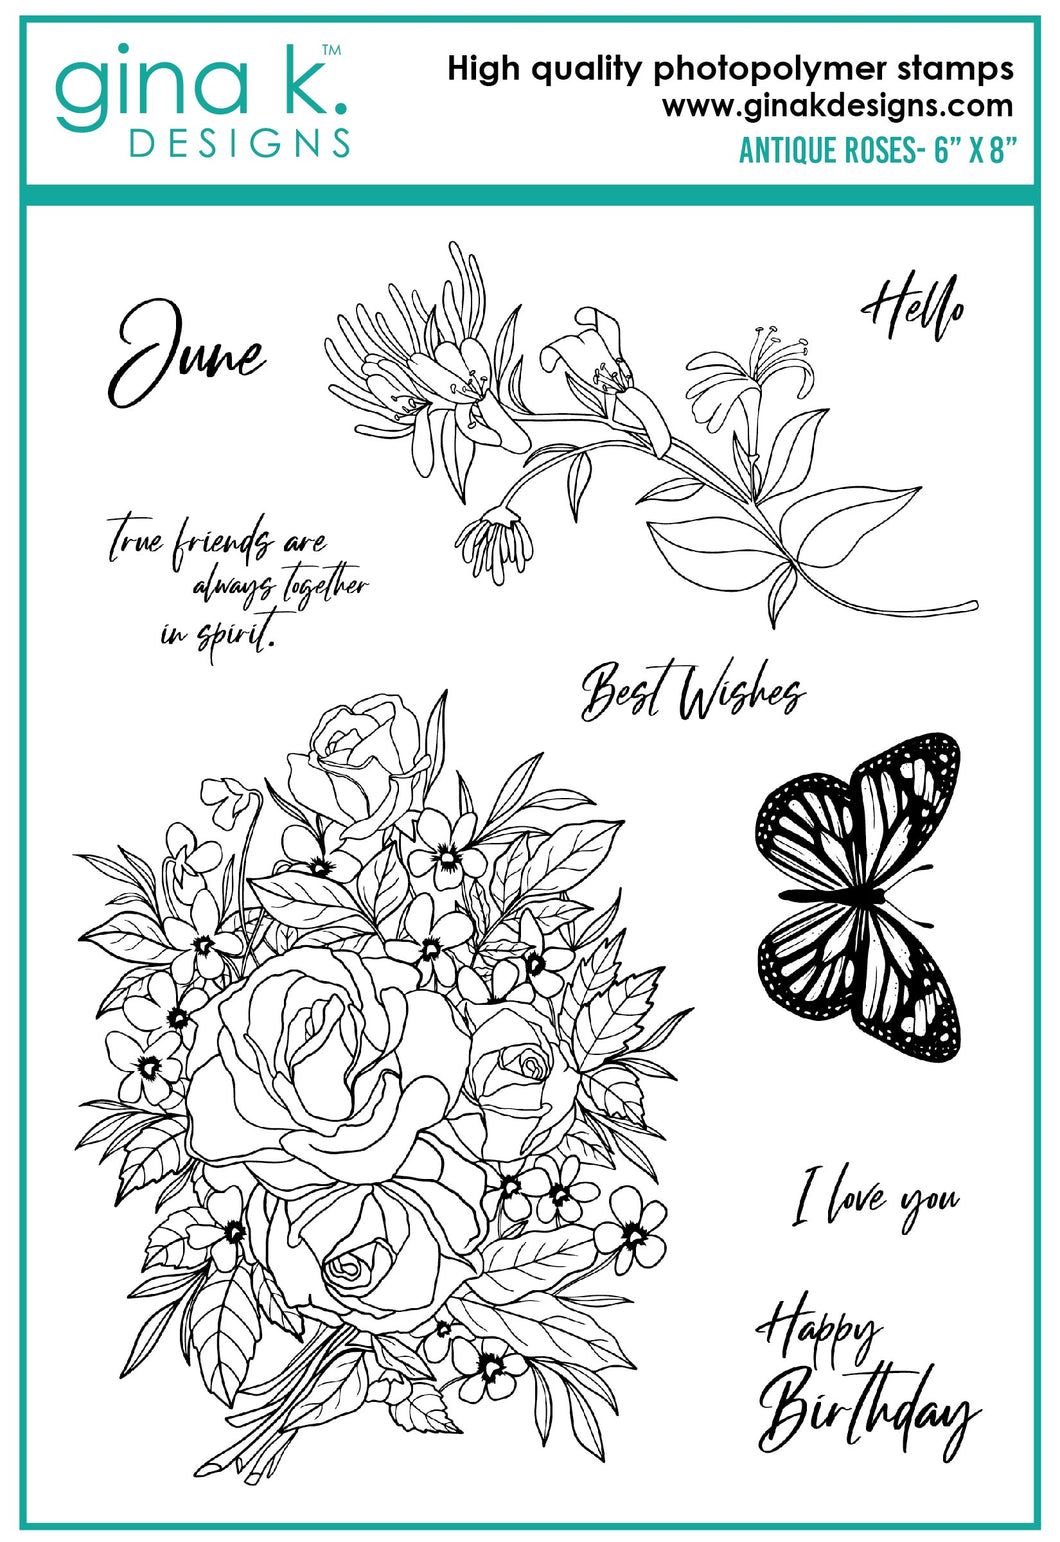 Gina K. Designs - Stamps - Antique Roses. Antique Roses is a stamp set by Hannah Drapinski. This set is made of premium clear photopolymer and measures 6